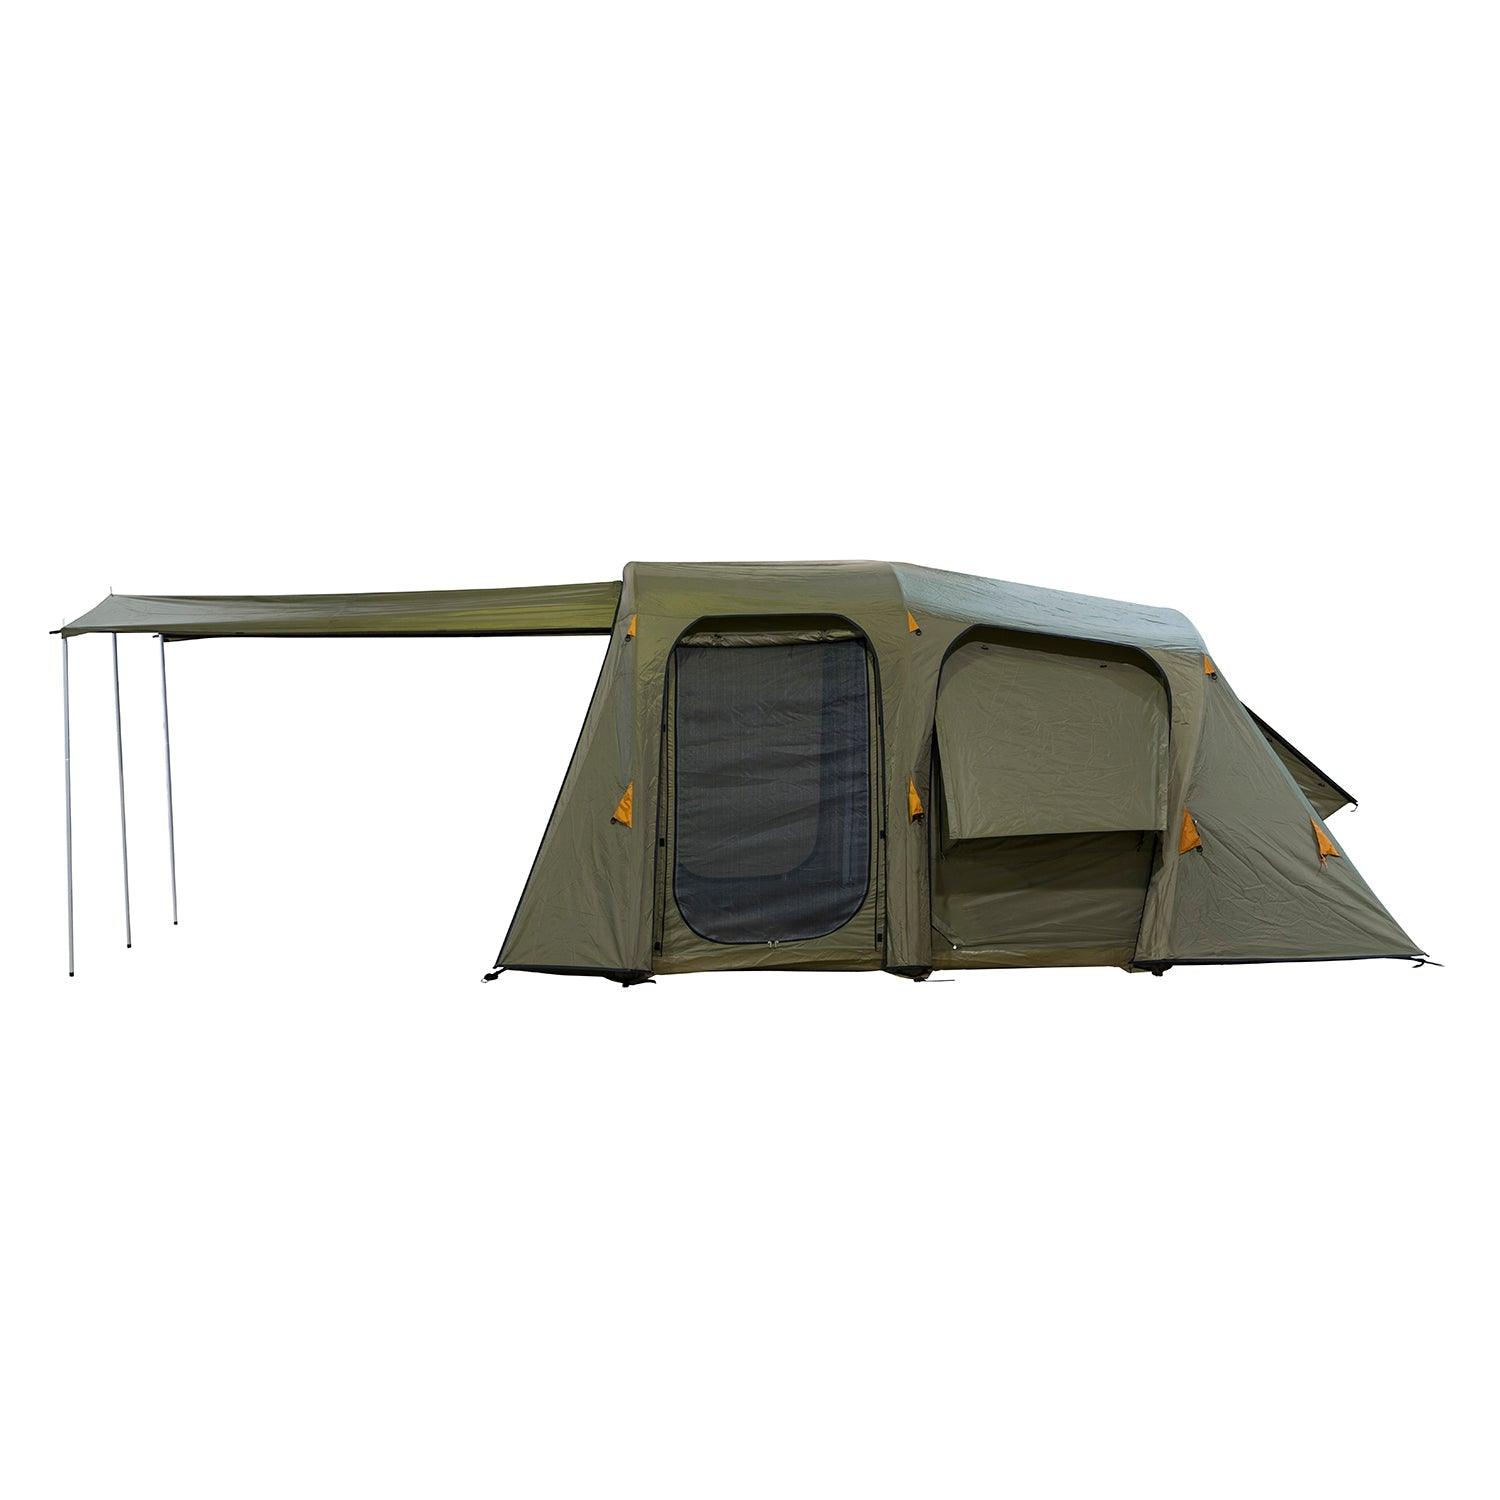 Air-Volution AT-6 Tent Green AIR-VOLUTION AT-6 TENT GREEN Shelters Darche- Adventure Imports